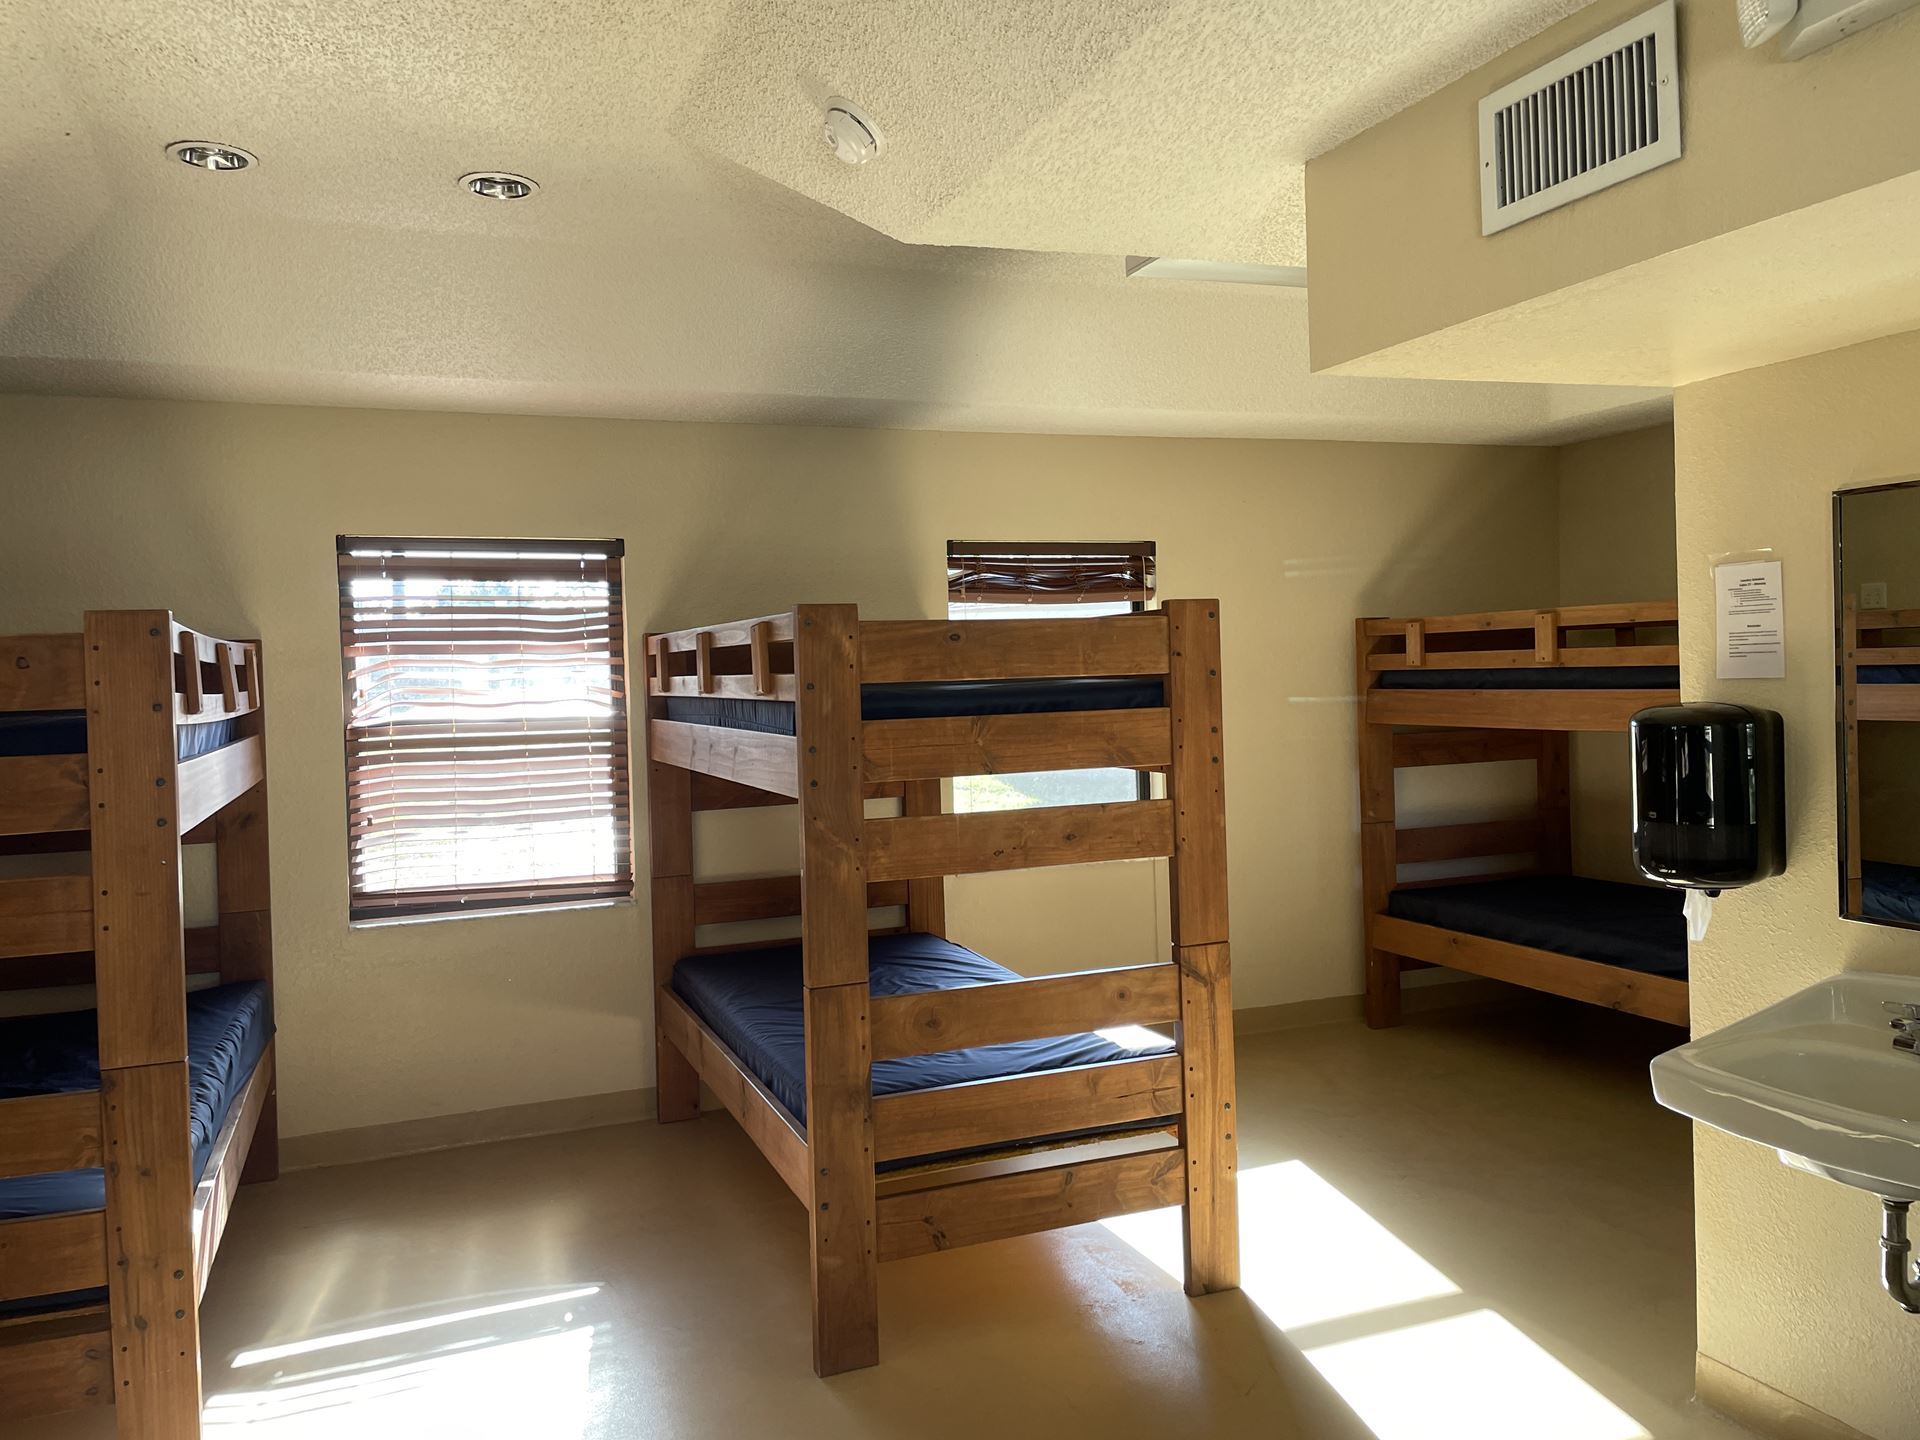 a picture of 3 bunk beds